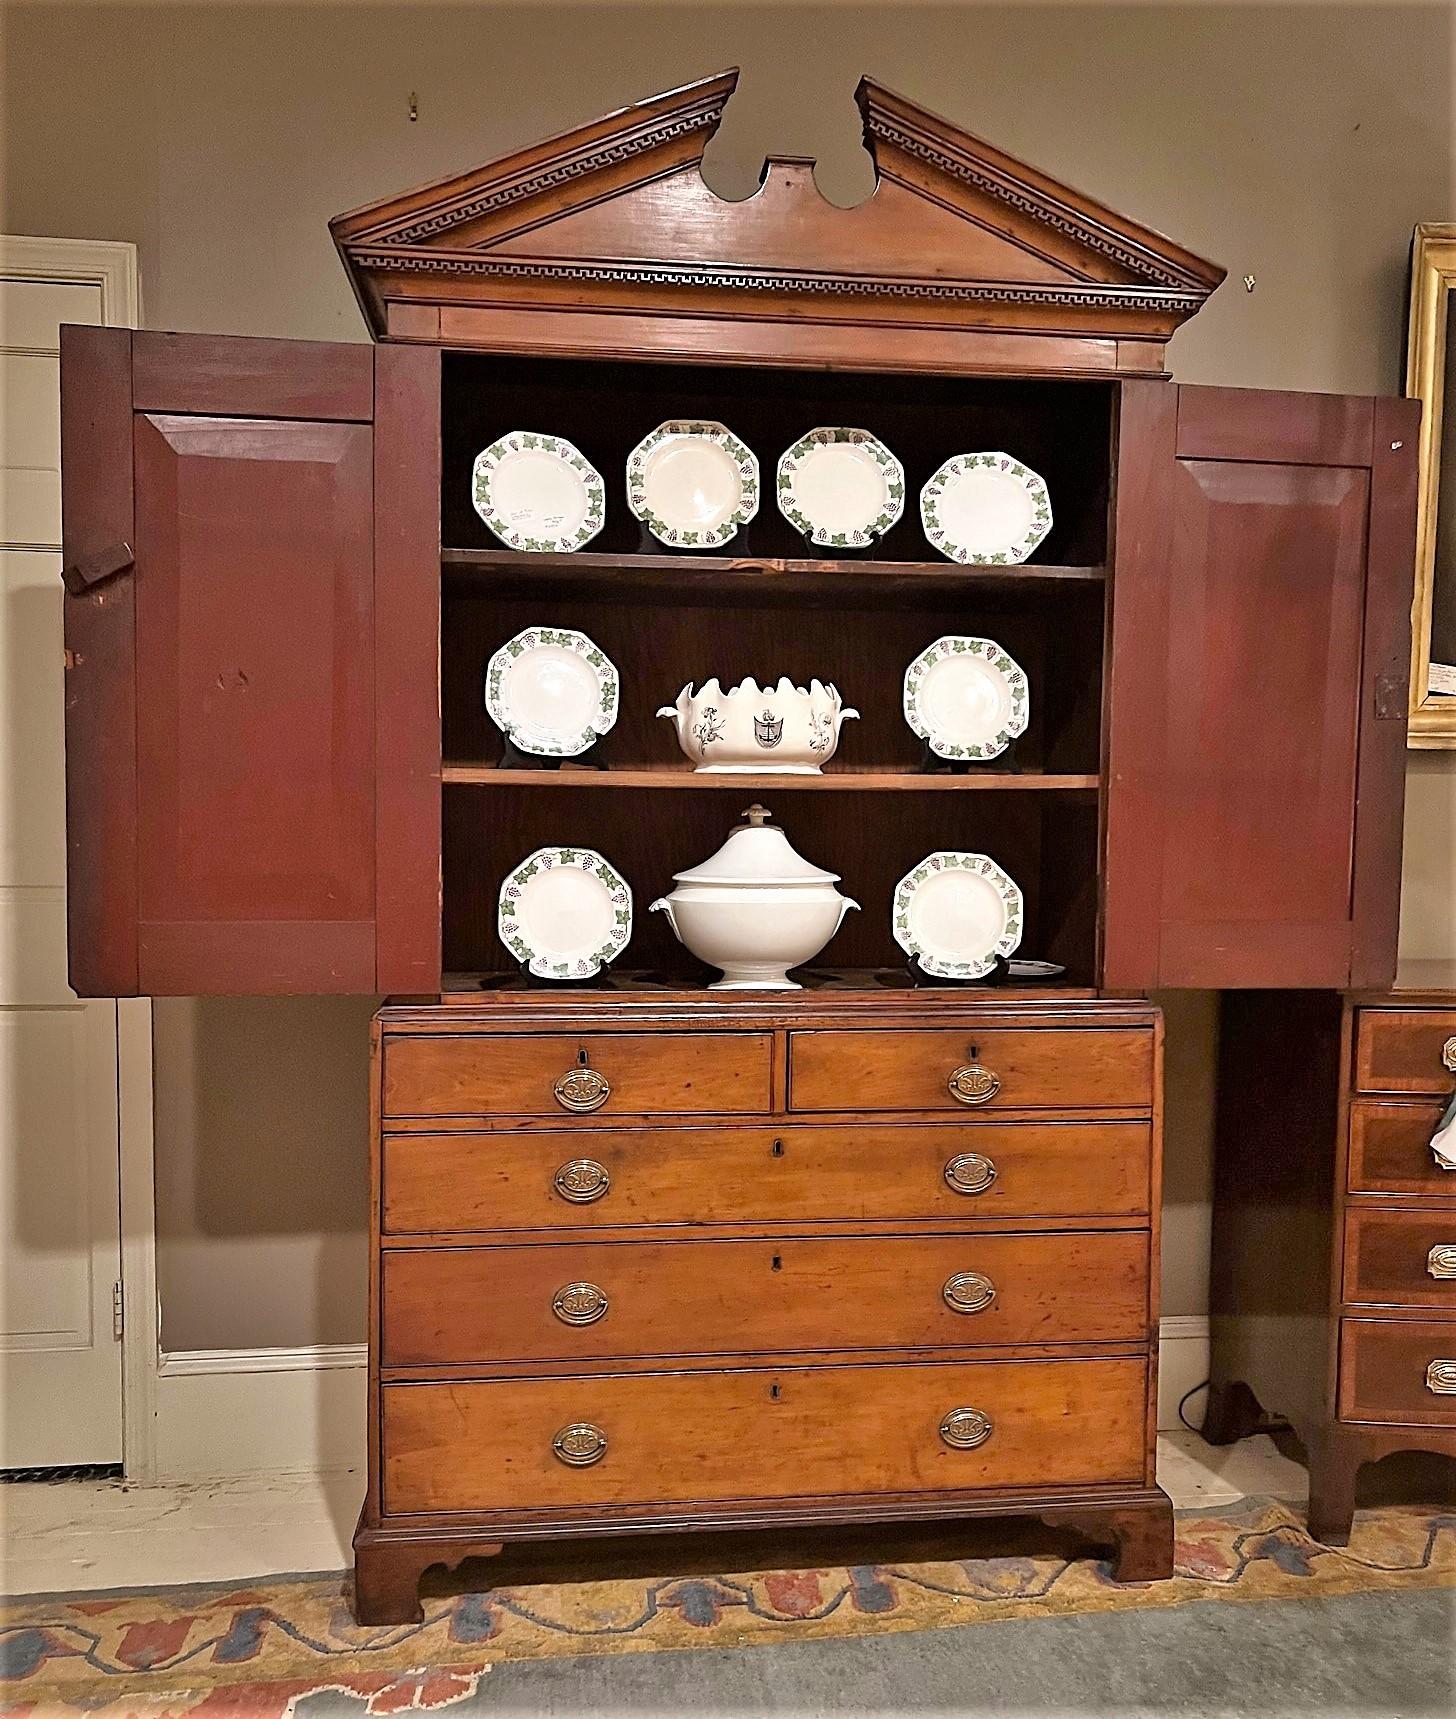 This handsome cupboard probably started life in the late 18th Century as a 2-over-3-drawer Chippendale old-growth cherry wood chest.  In the early 19th Century a 2-door cabinet was adapted to fit on top of the chest. Sometime in the early 20th